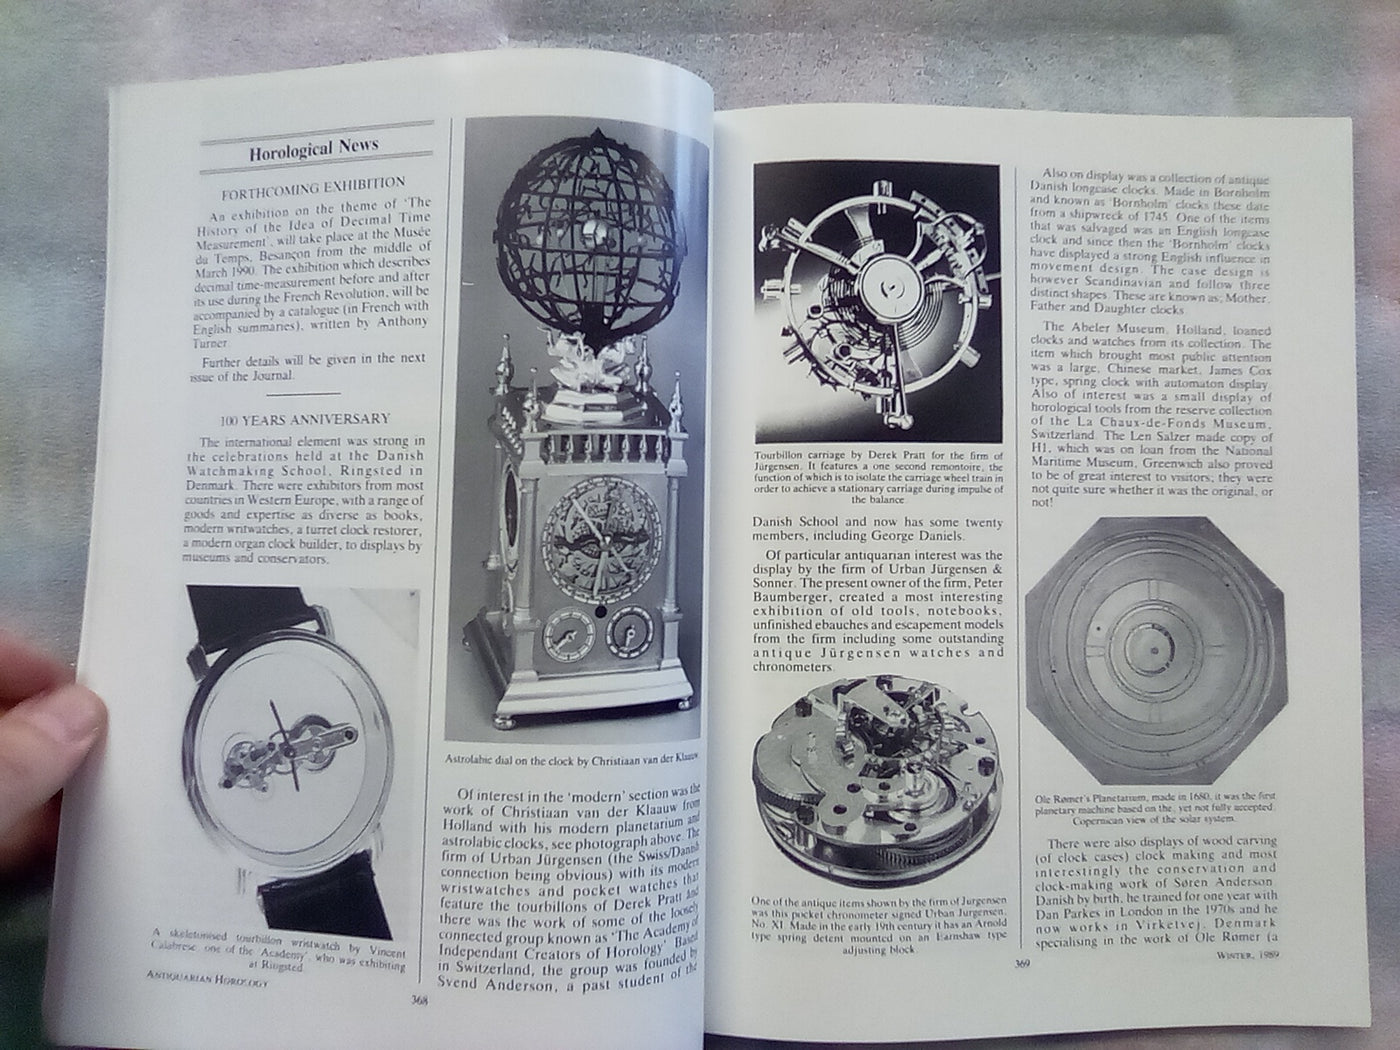 Antiquarian Horology Journal - 8 Issues from 1988-1989